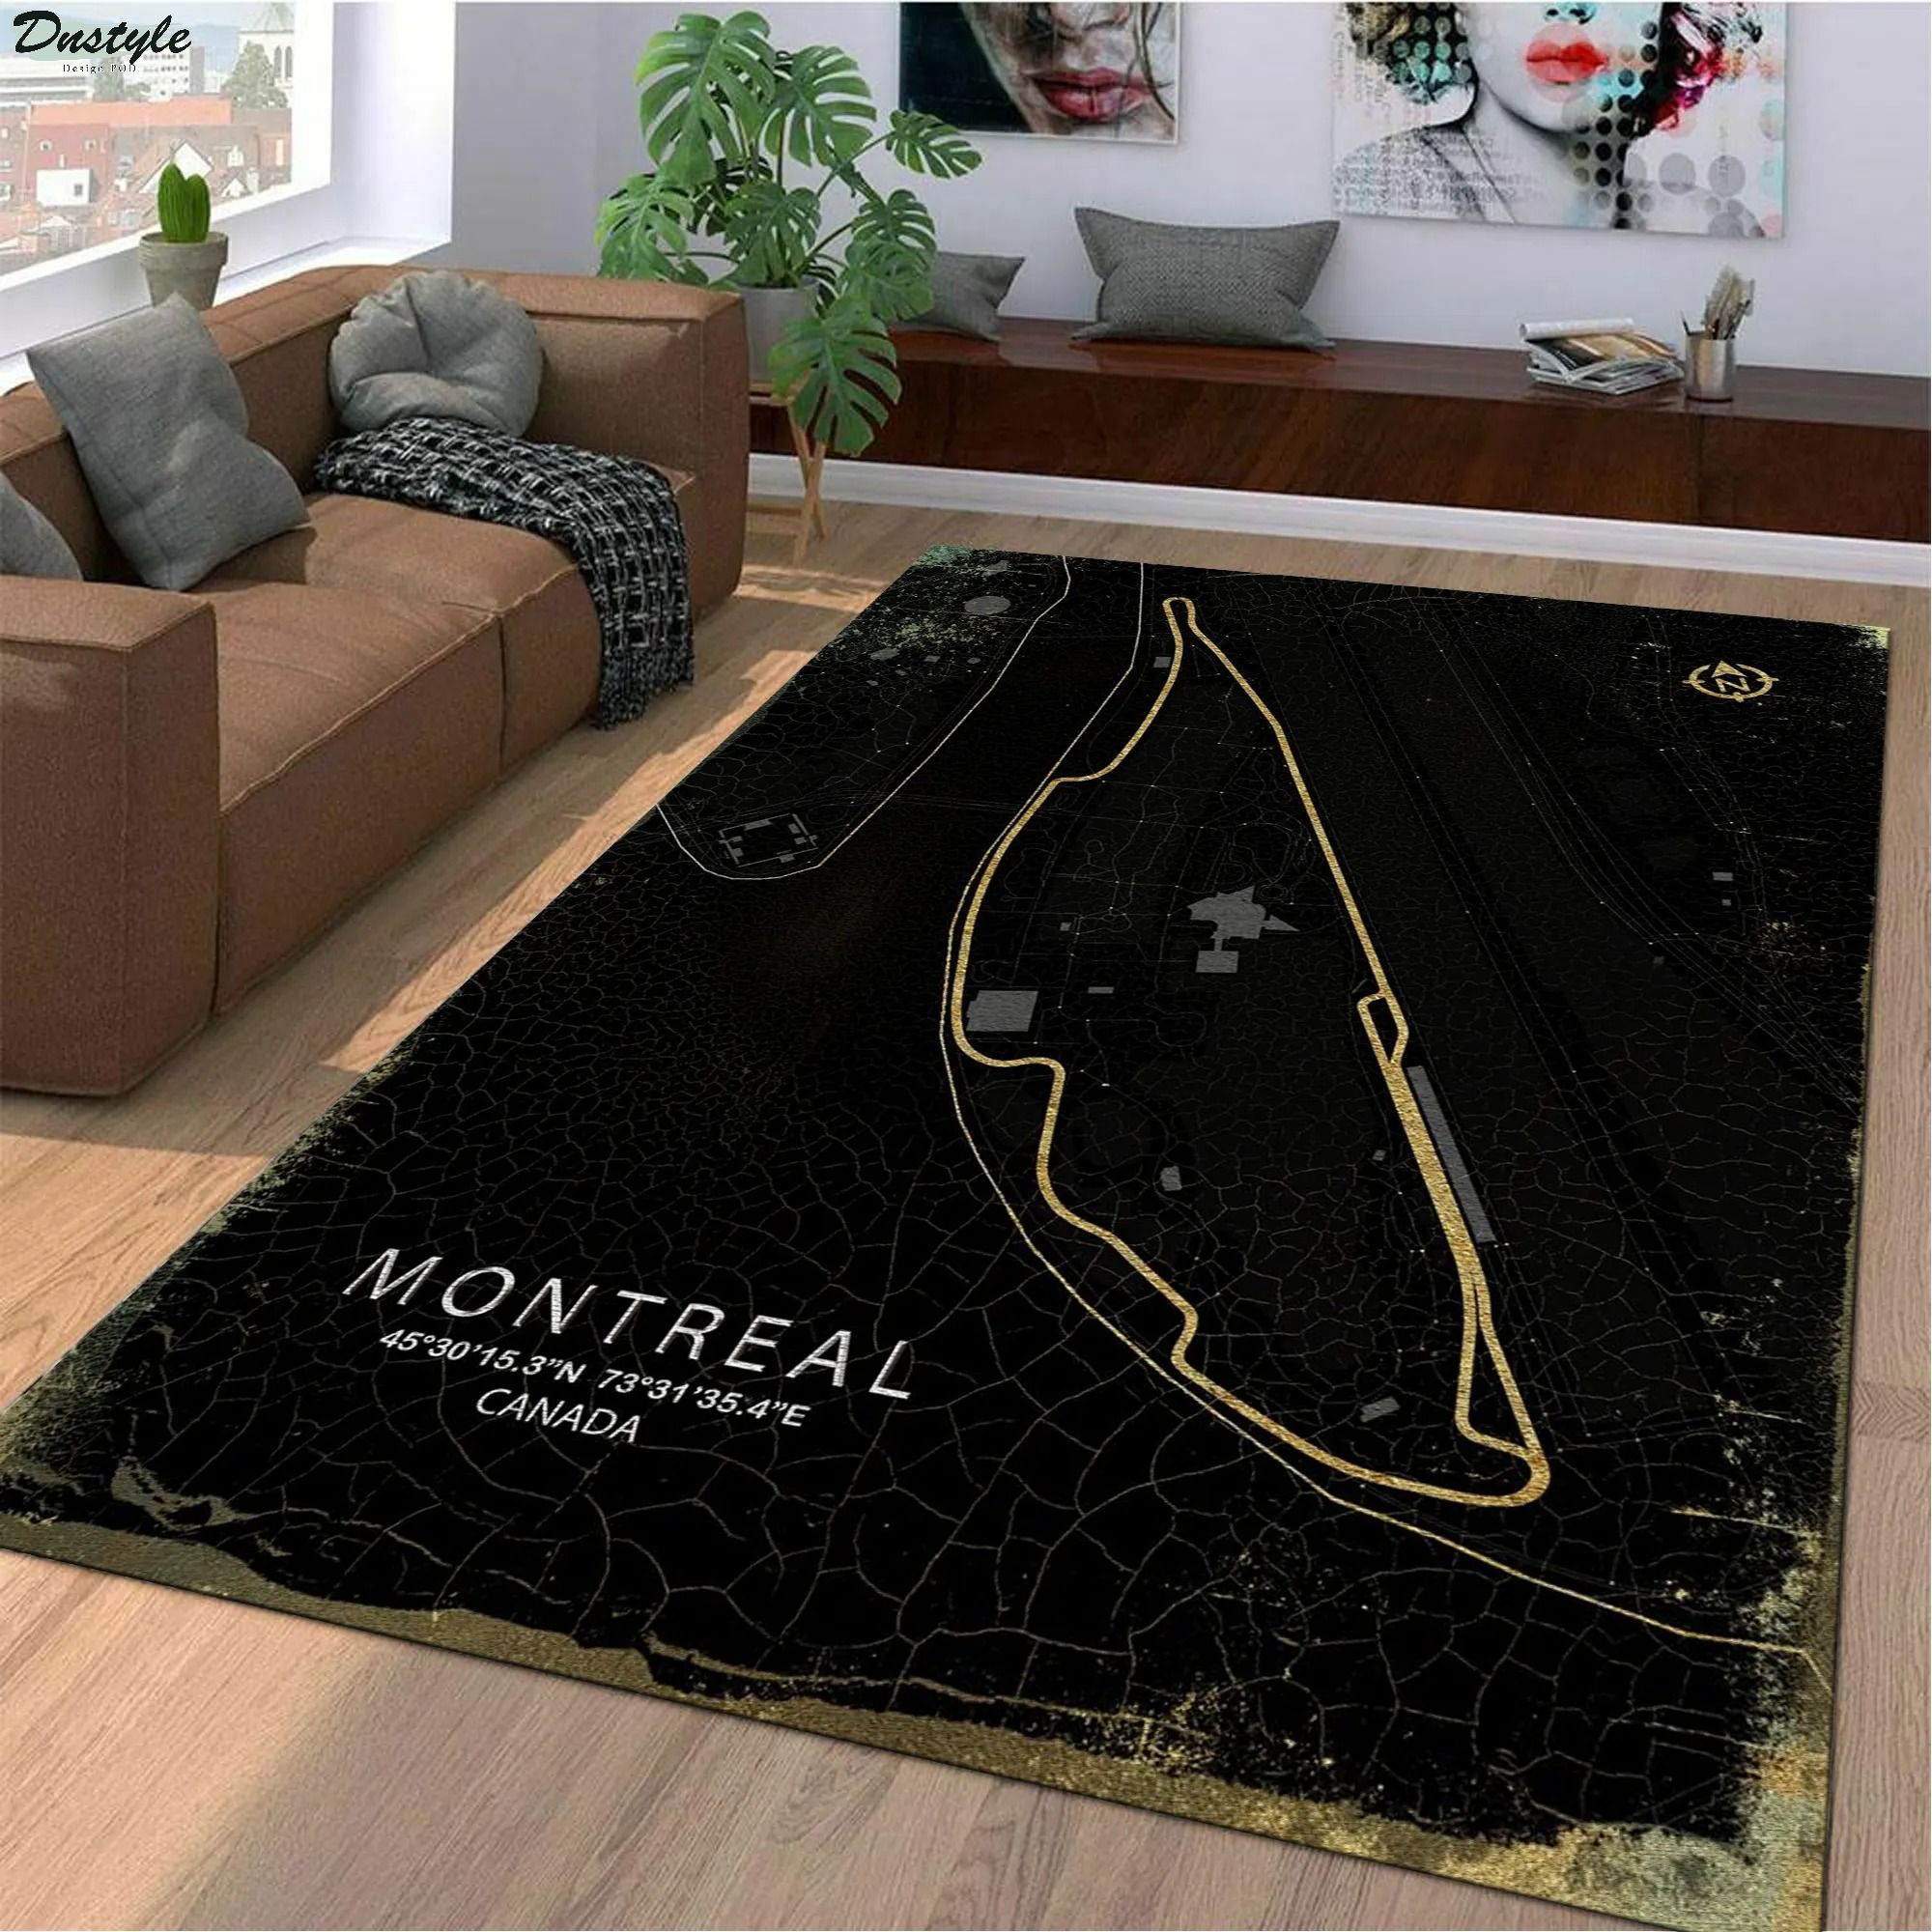 Montreal canada f1 track rug